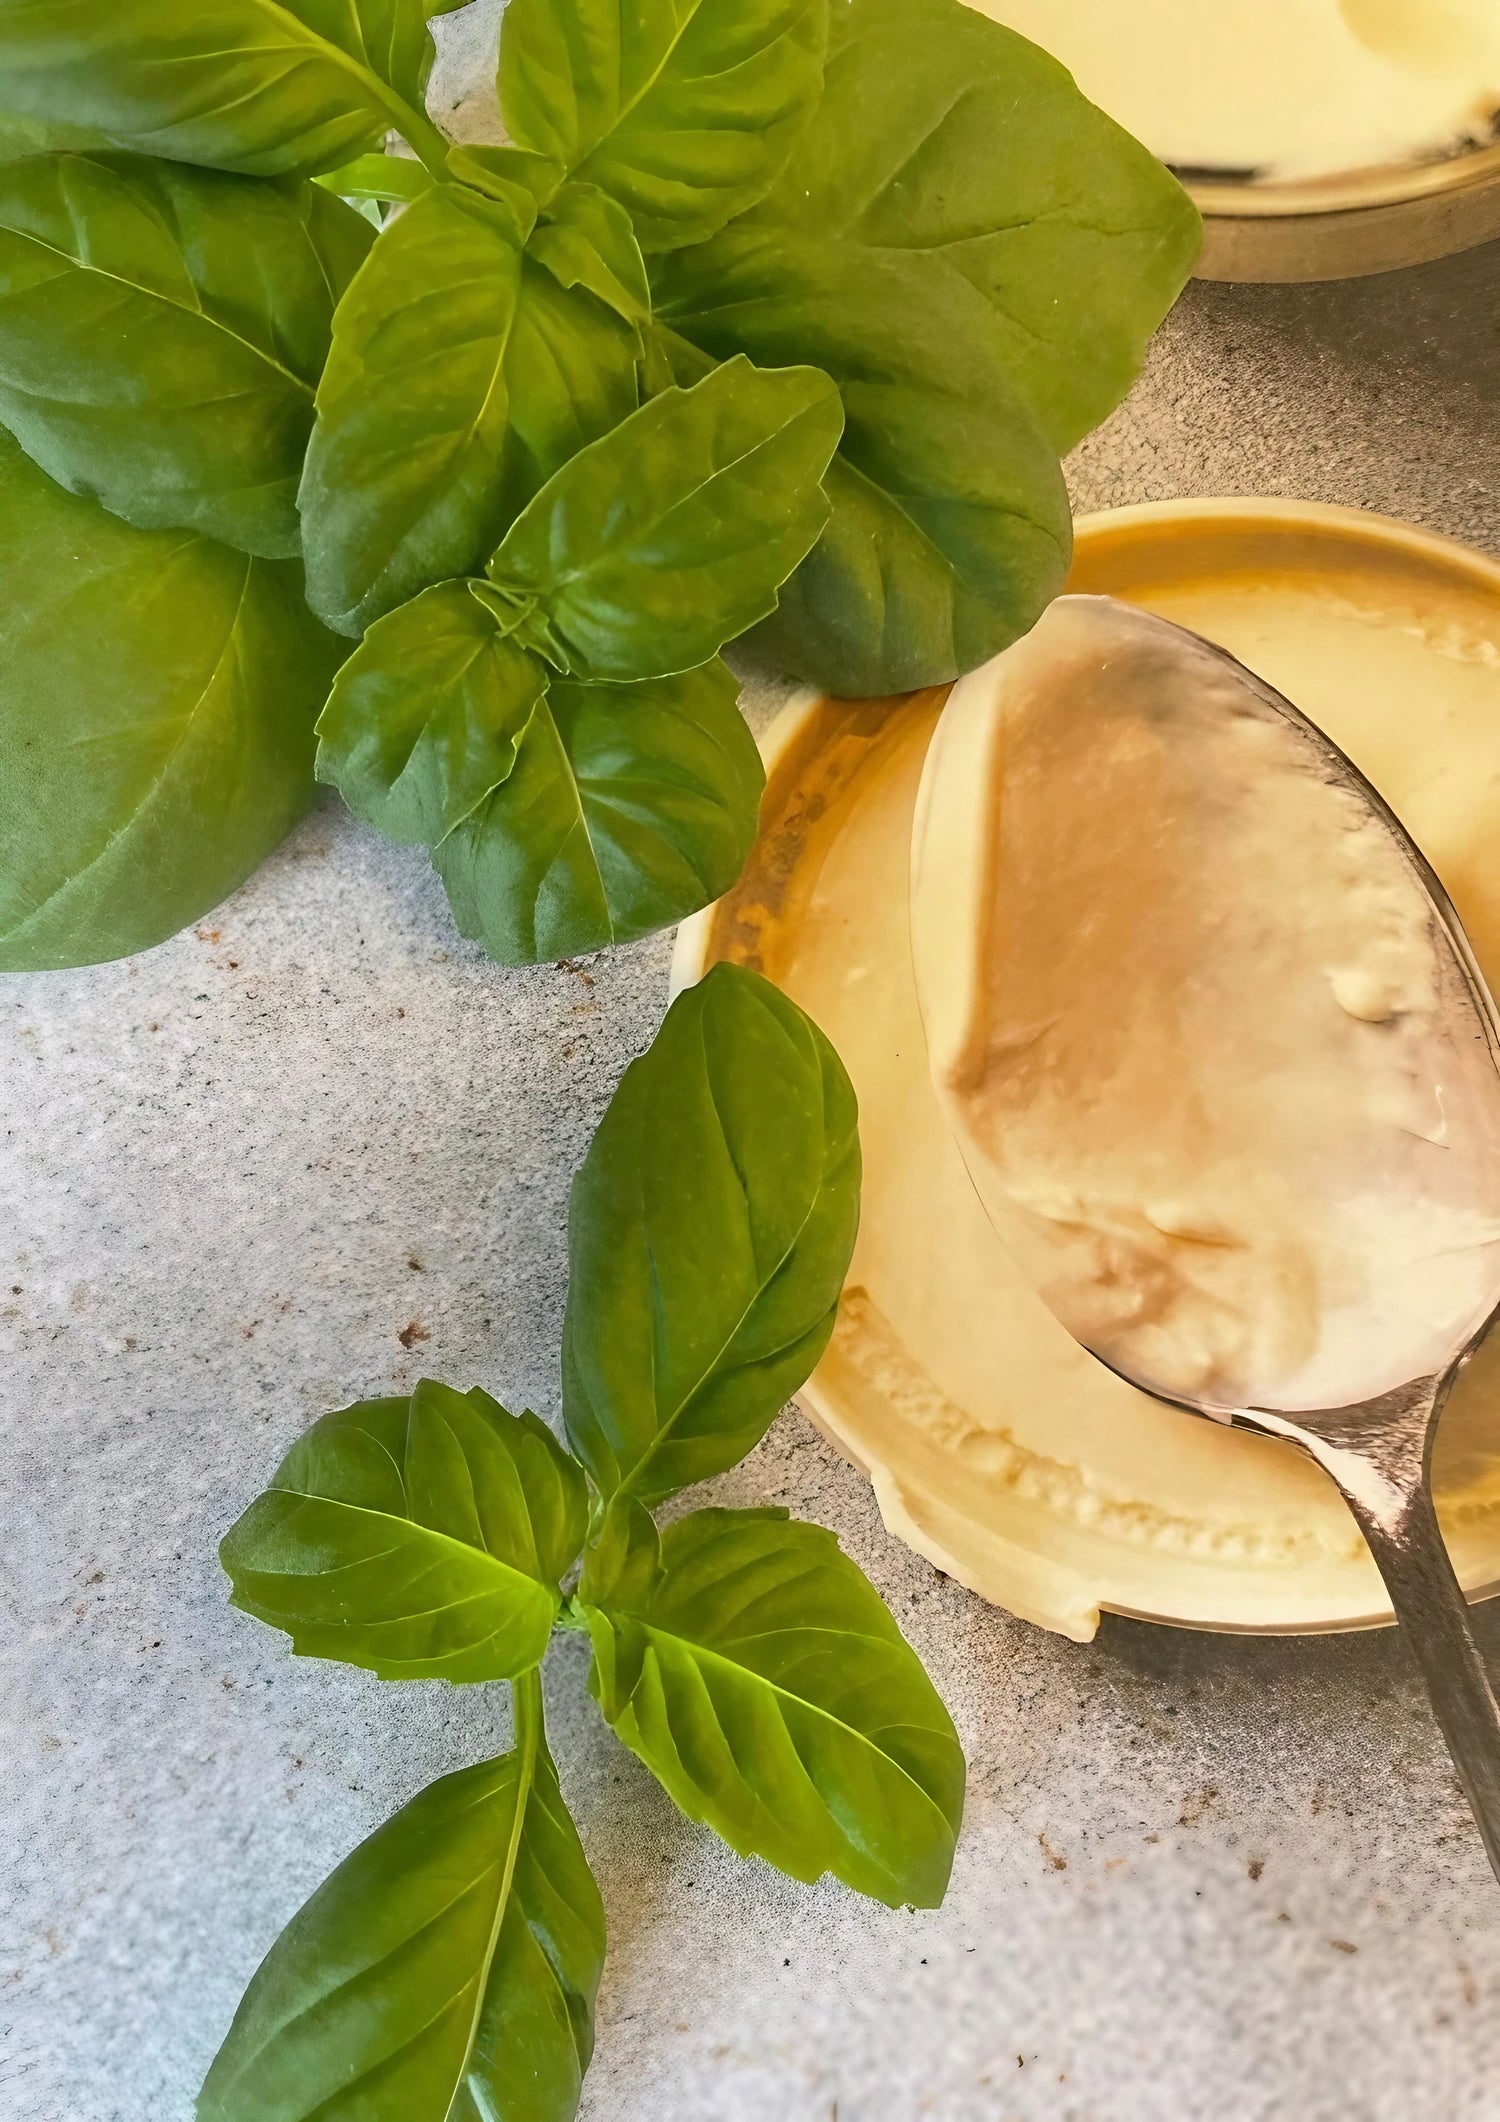 A bowl filled with large Thai basil leaves next to a spoon